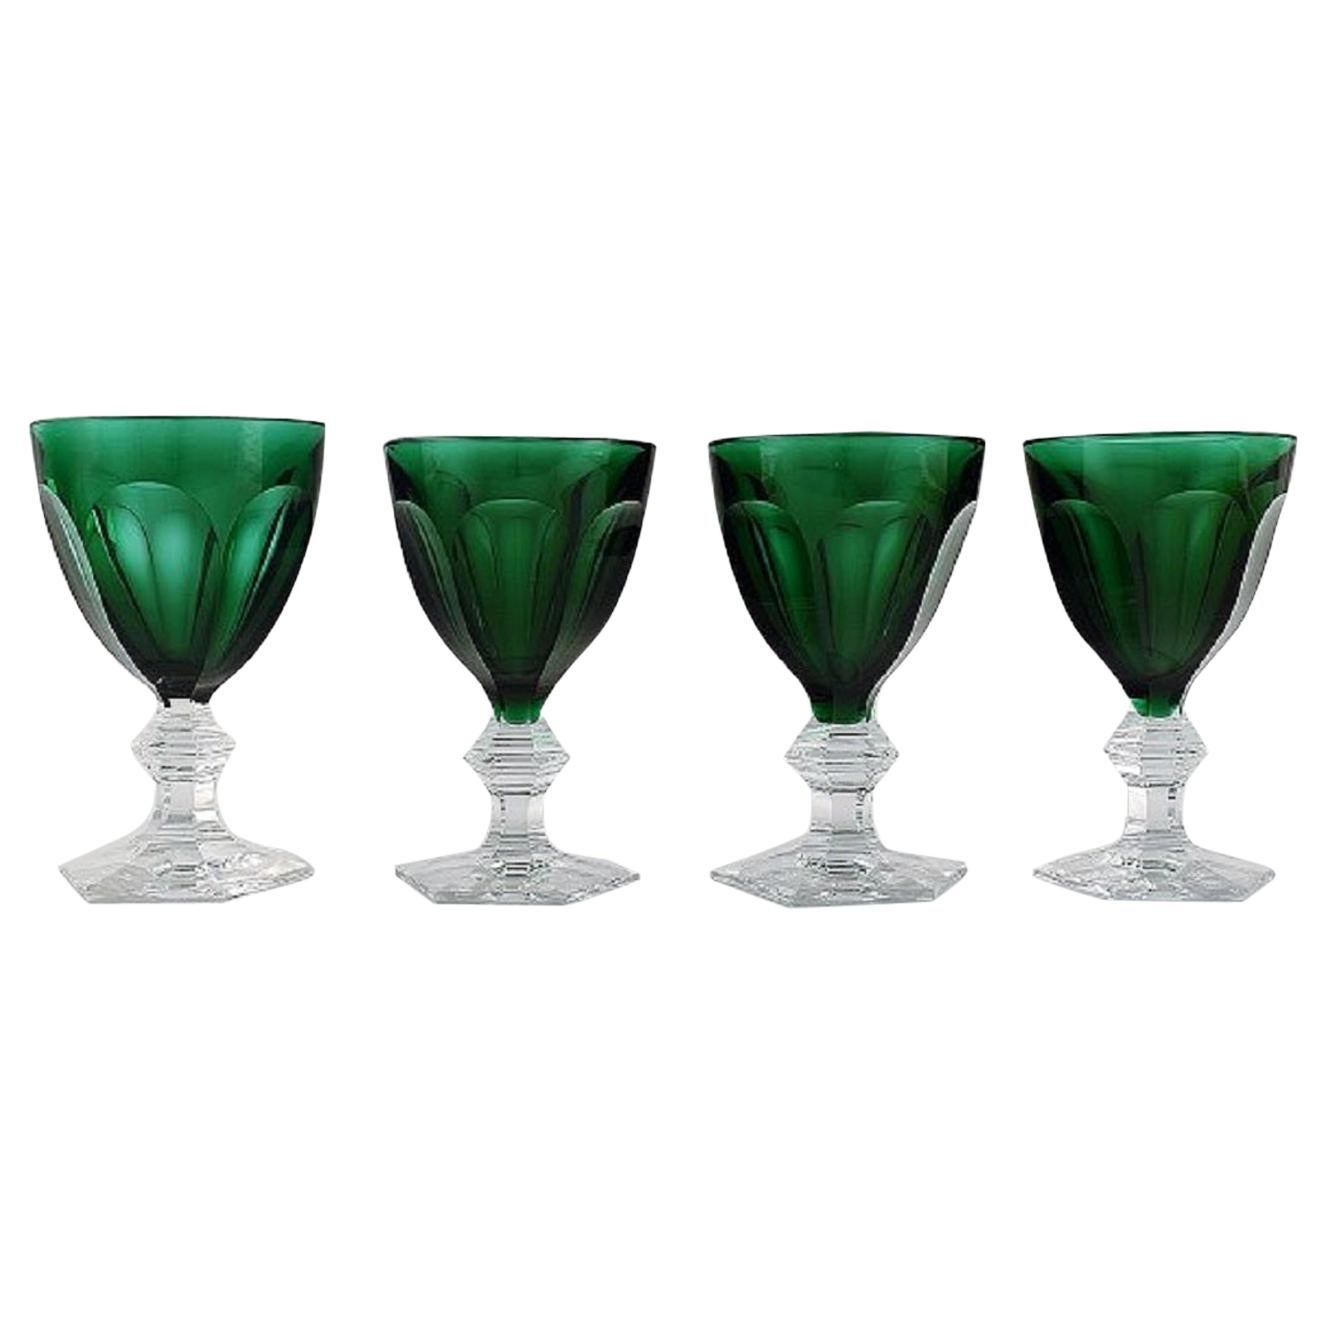 Baccarat, France, Four "Harcourt 1841" Wine Glasses in Crystal with Green Cuppa